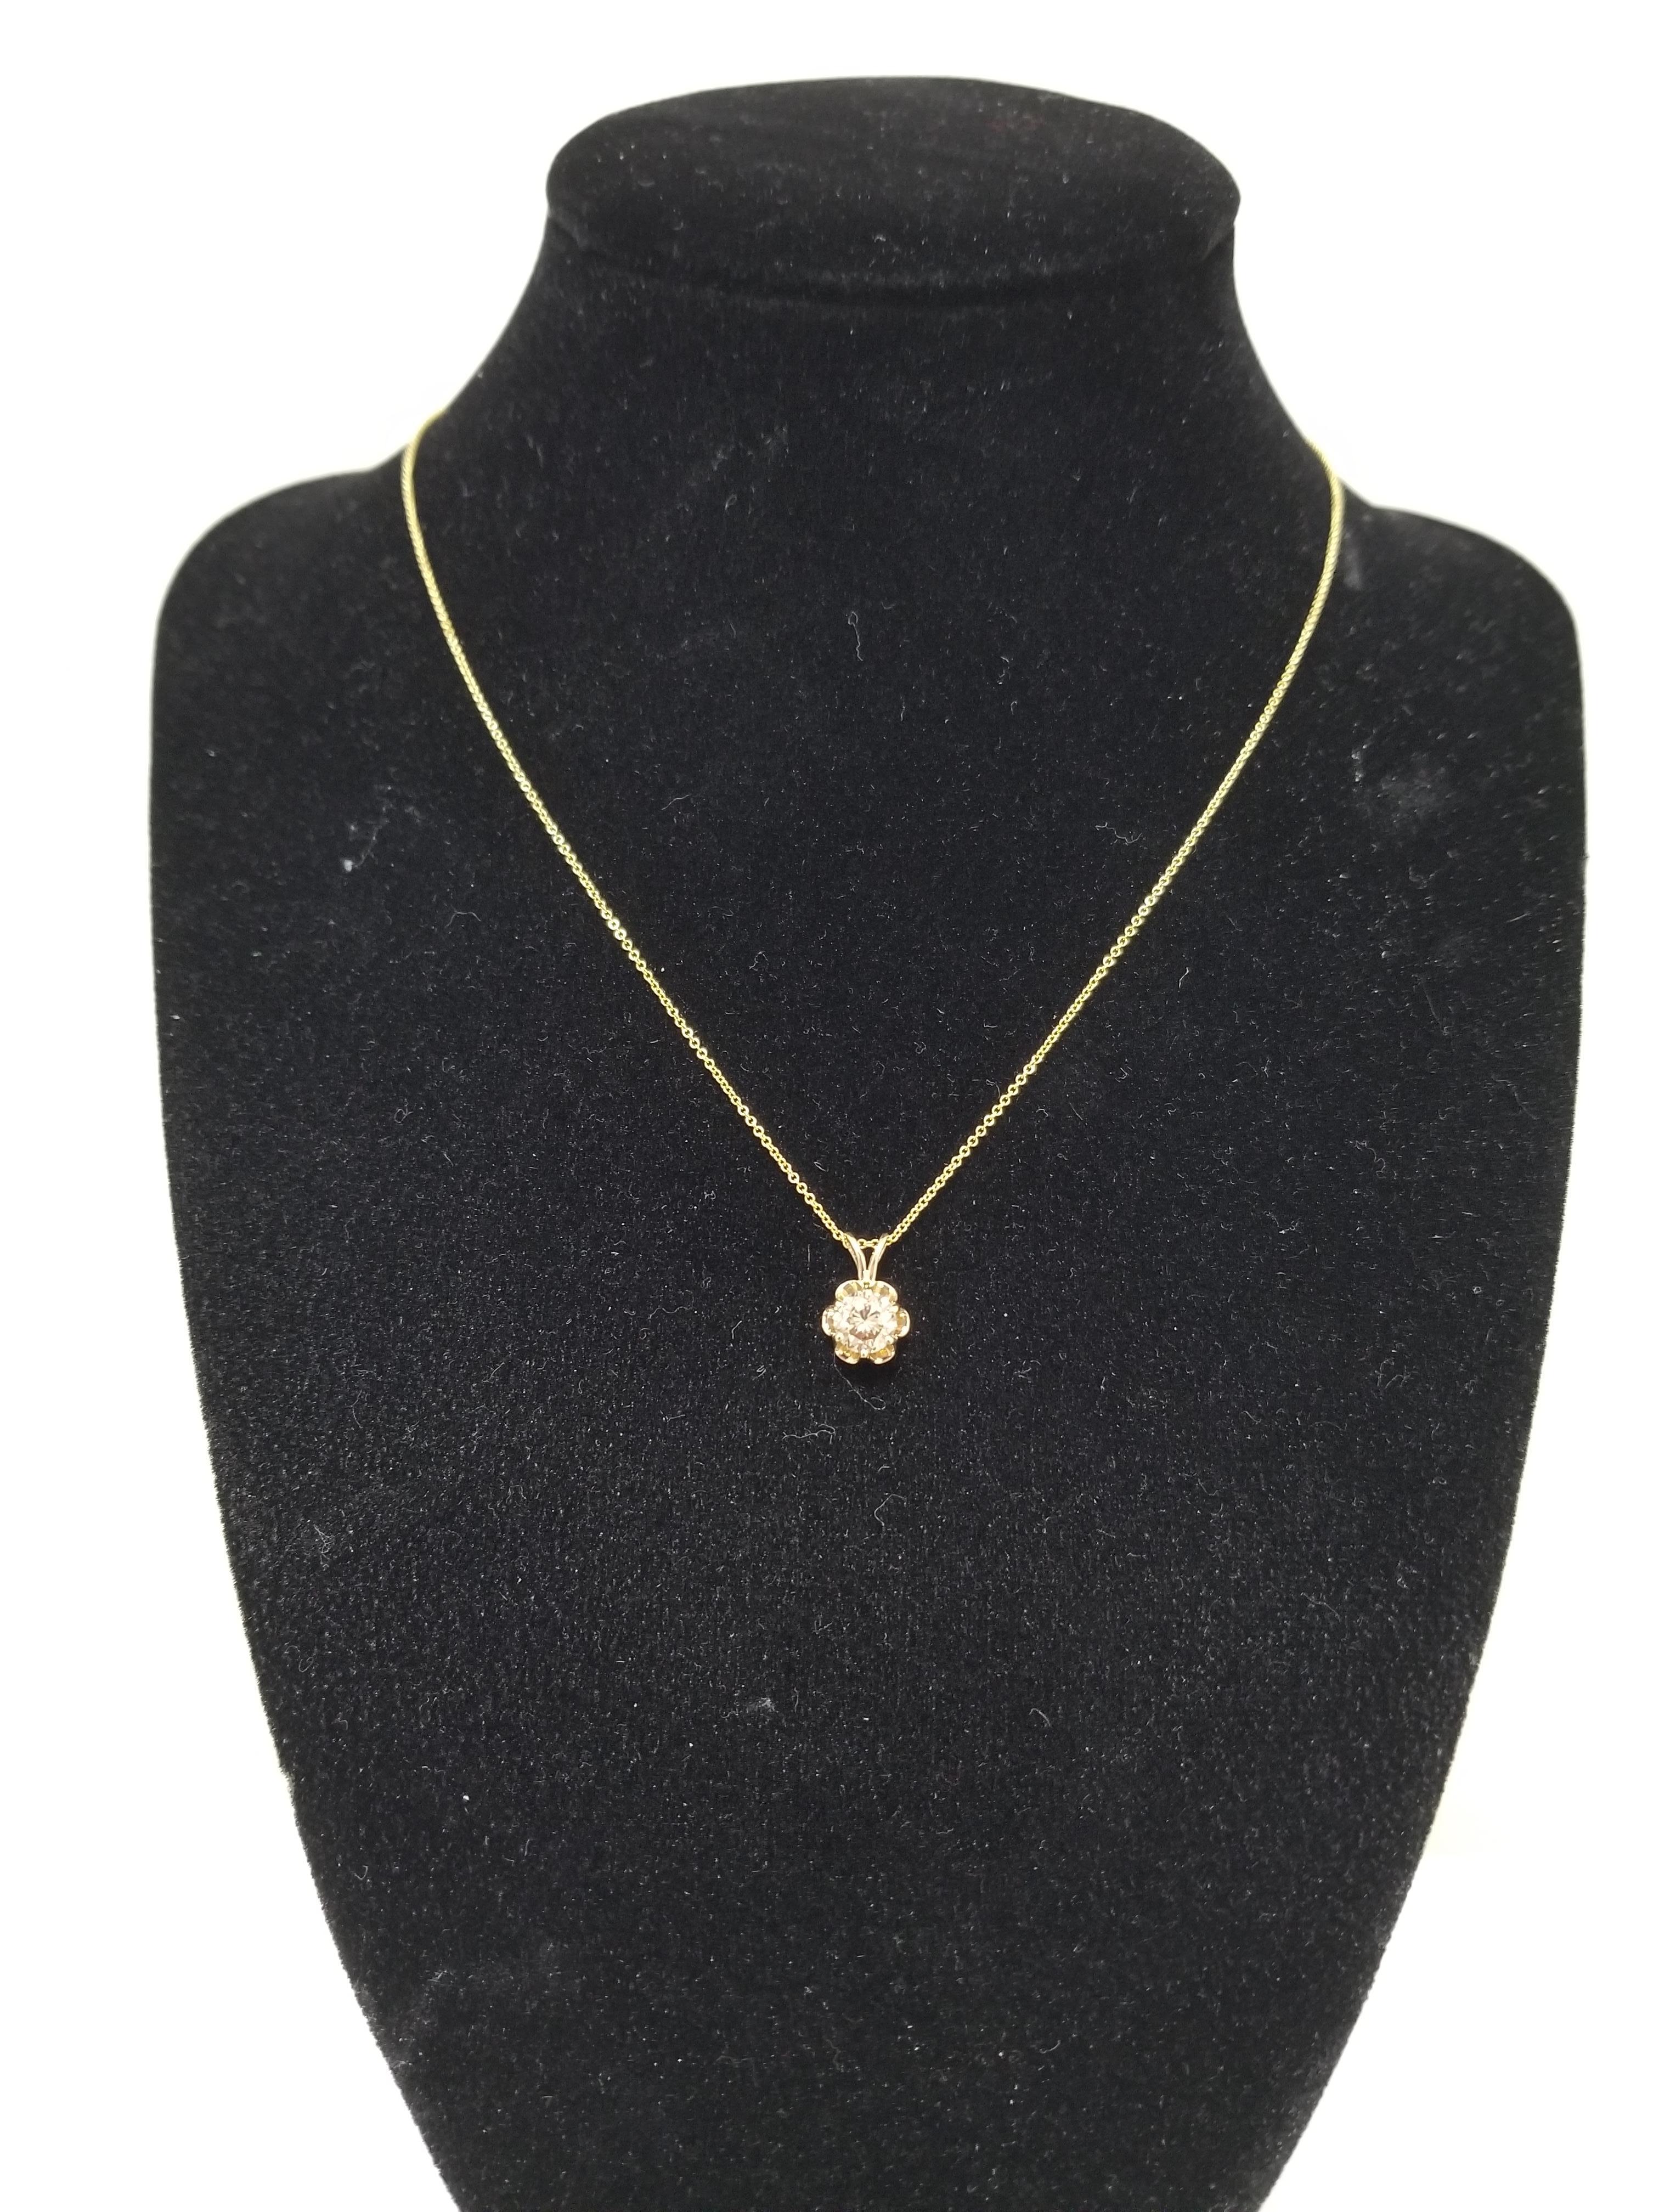 This gorgeous diamond pendant features a 0.72 carat GIA light brown round diamond solitaire set in a beautiful 14 karat yellow gold buttercup design.  Pendant measures approximately 0.5 inch length and 0.25 inch wide. 

(Pendant Only - Chain sold